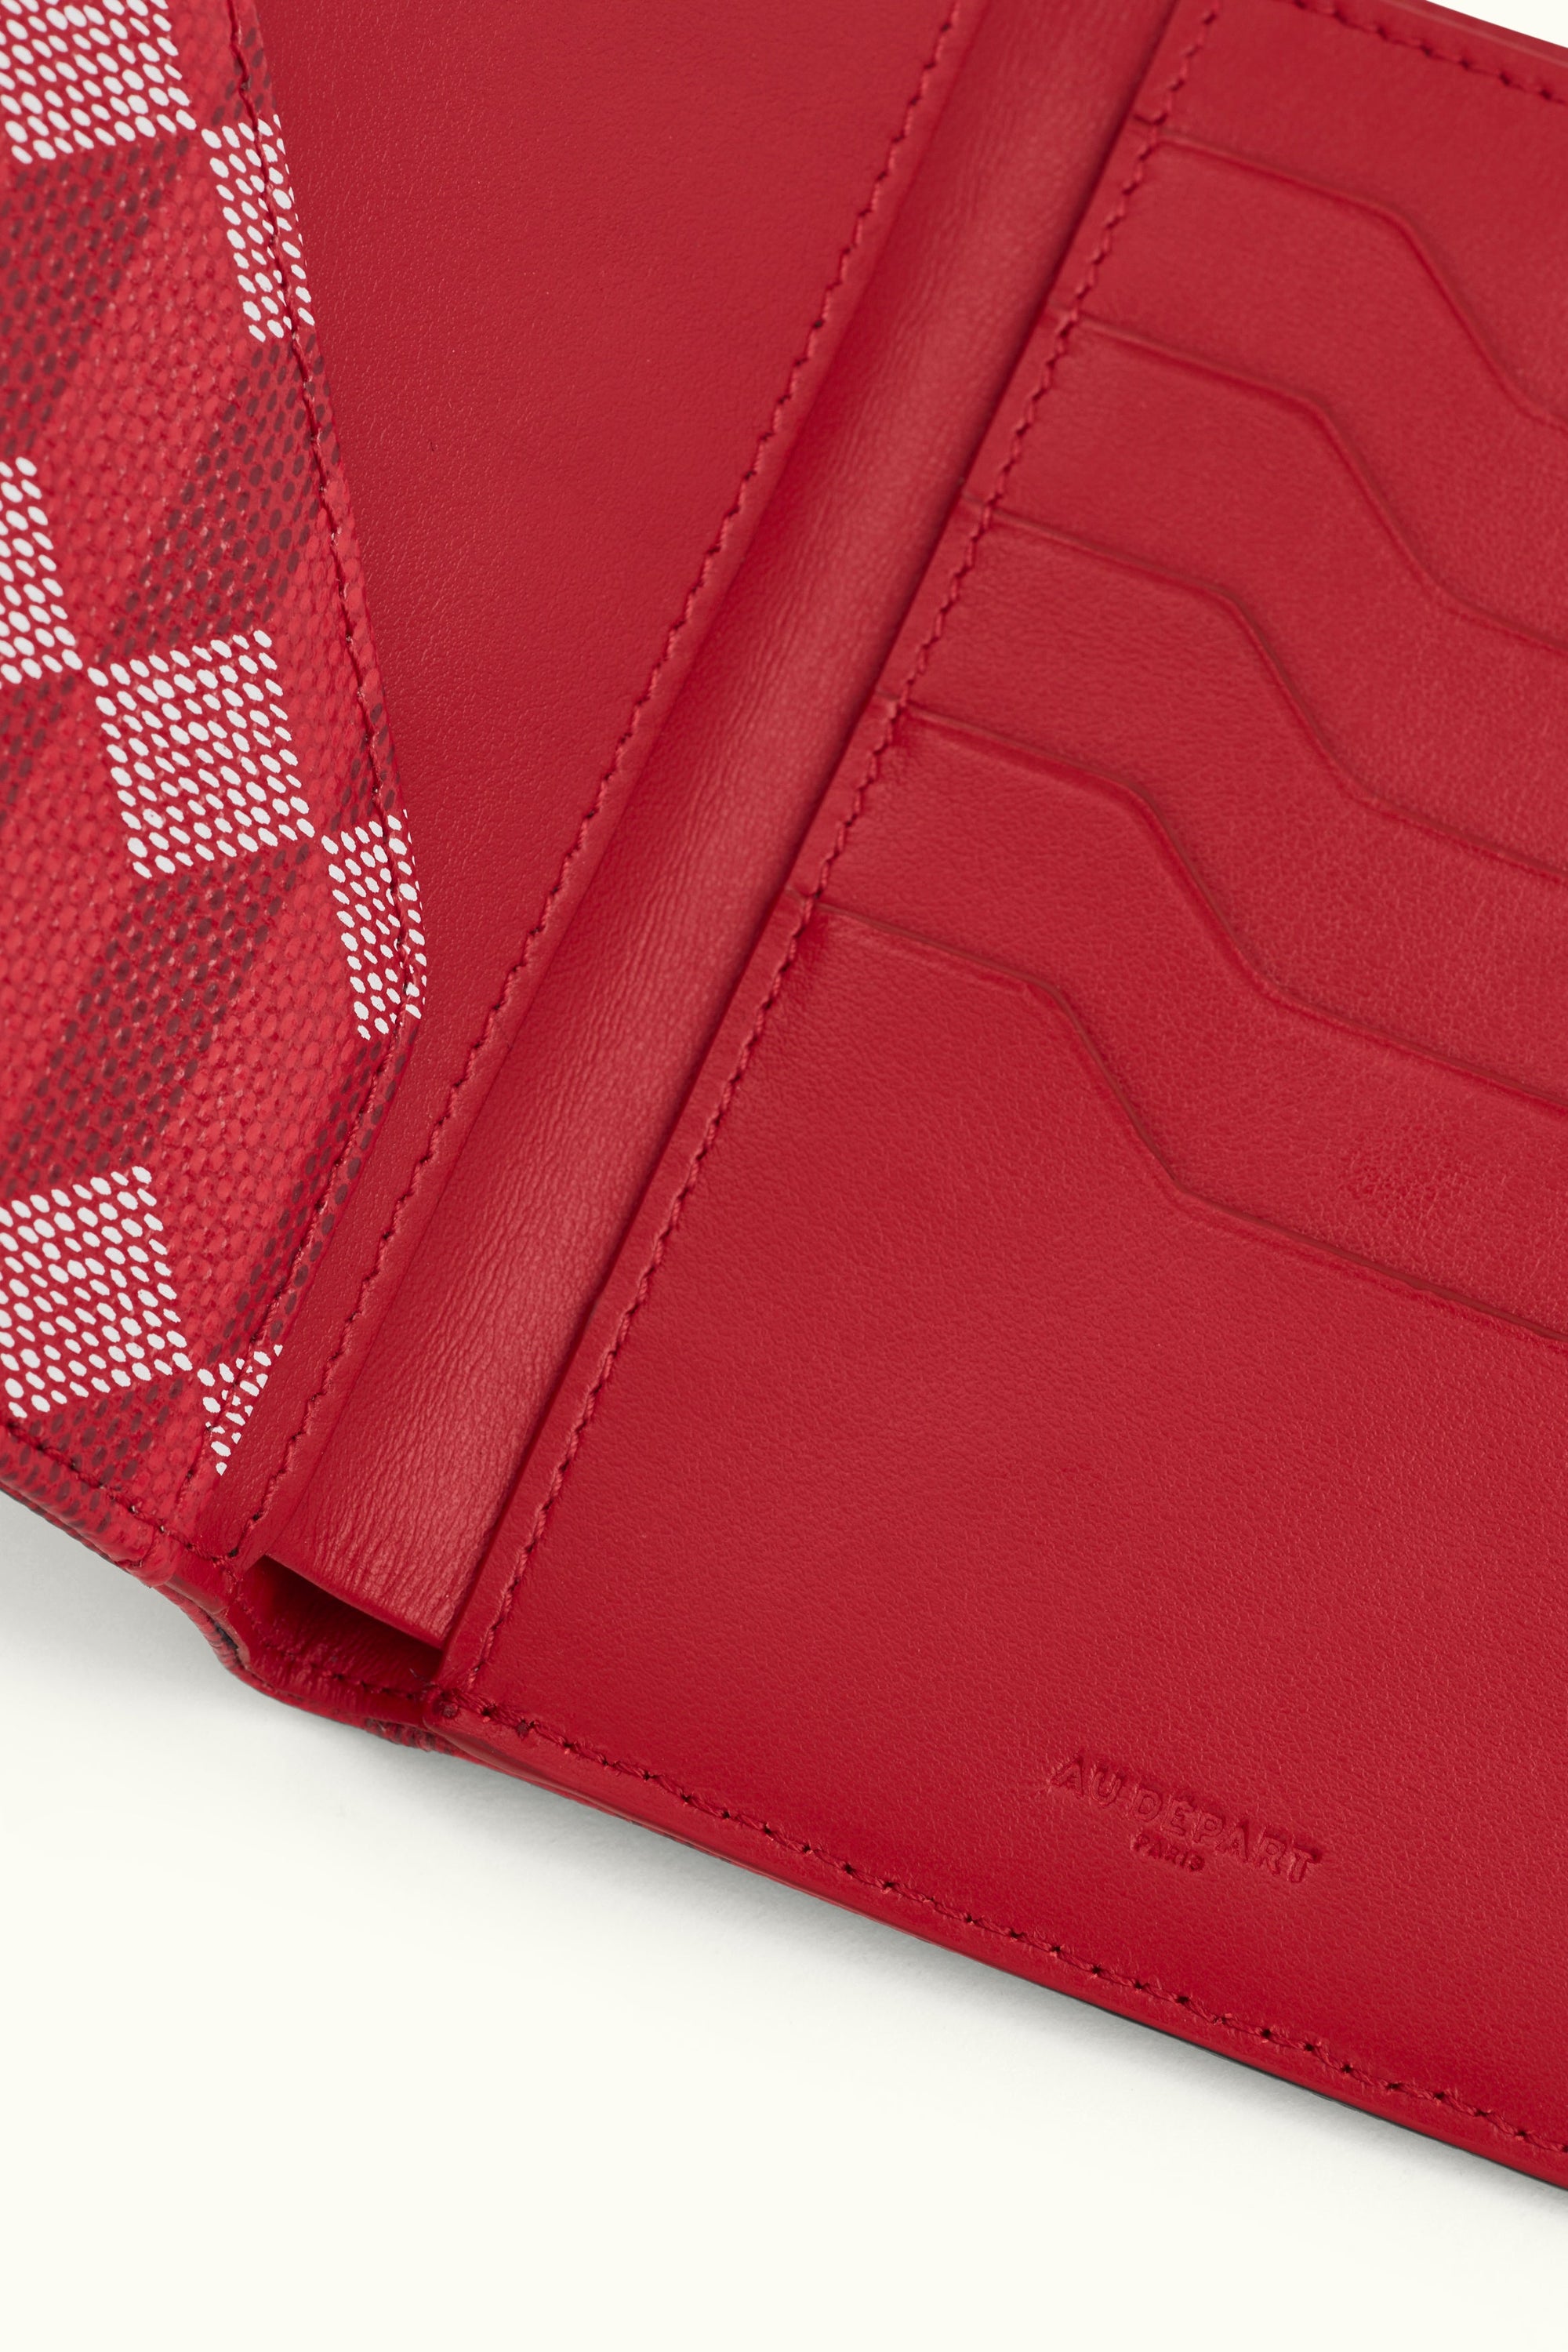 Le Porte-Passeport Coated Canvas Red